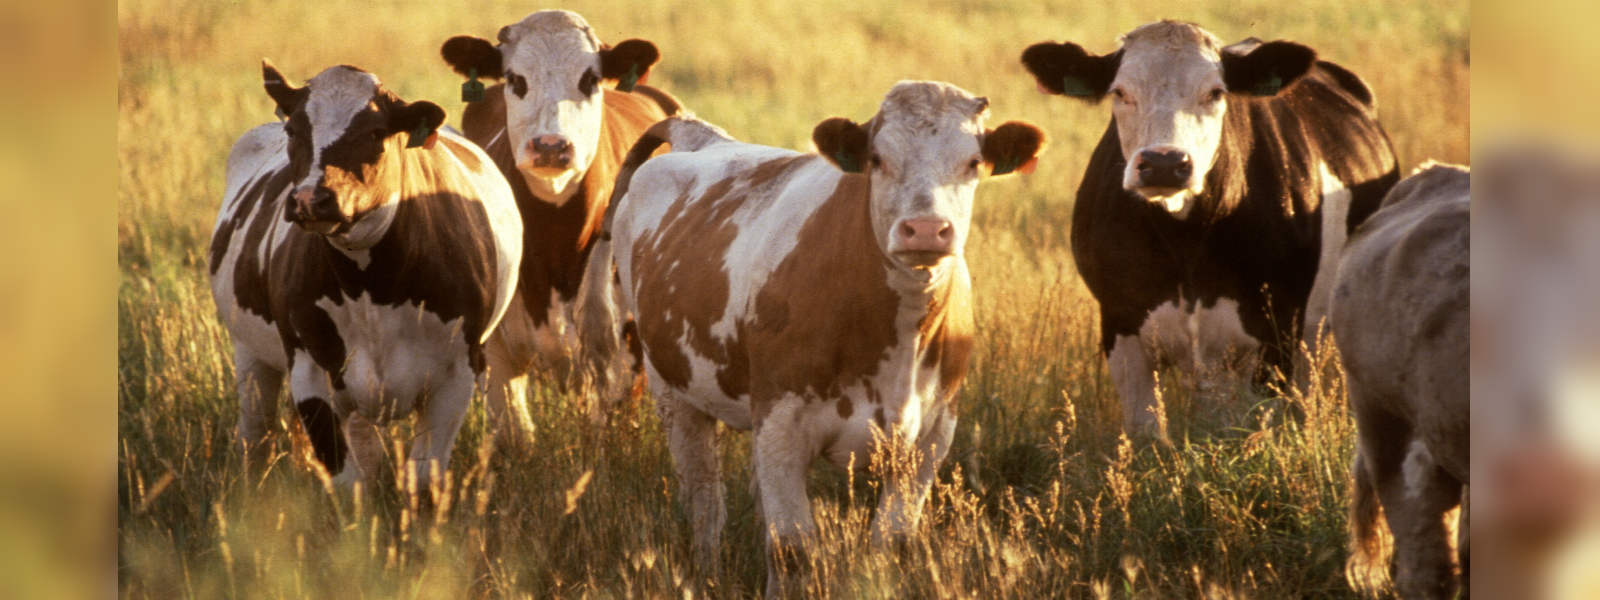 Government imported sick heifers - Veterinarian